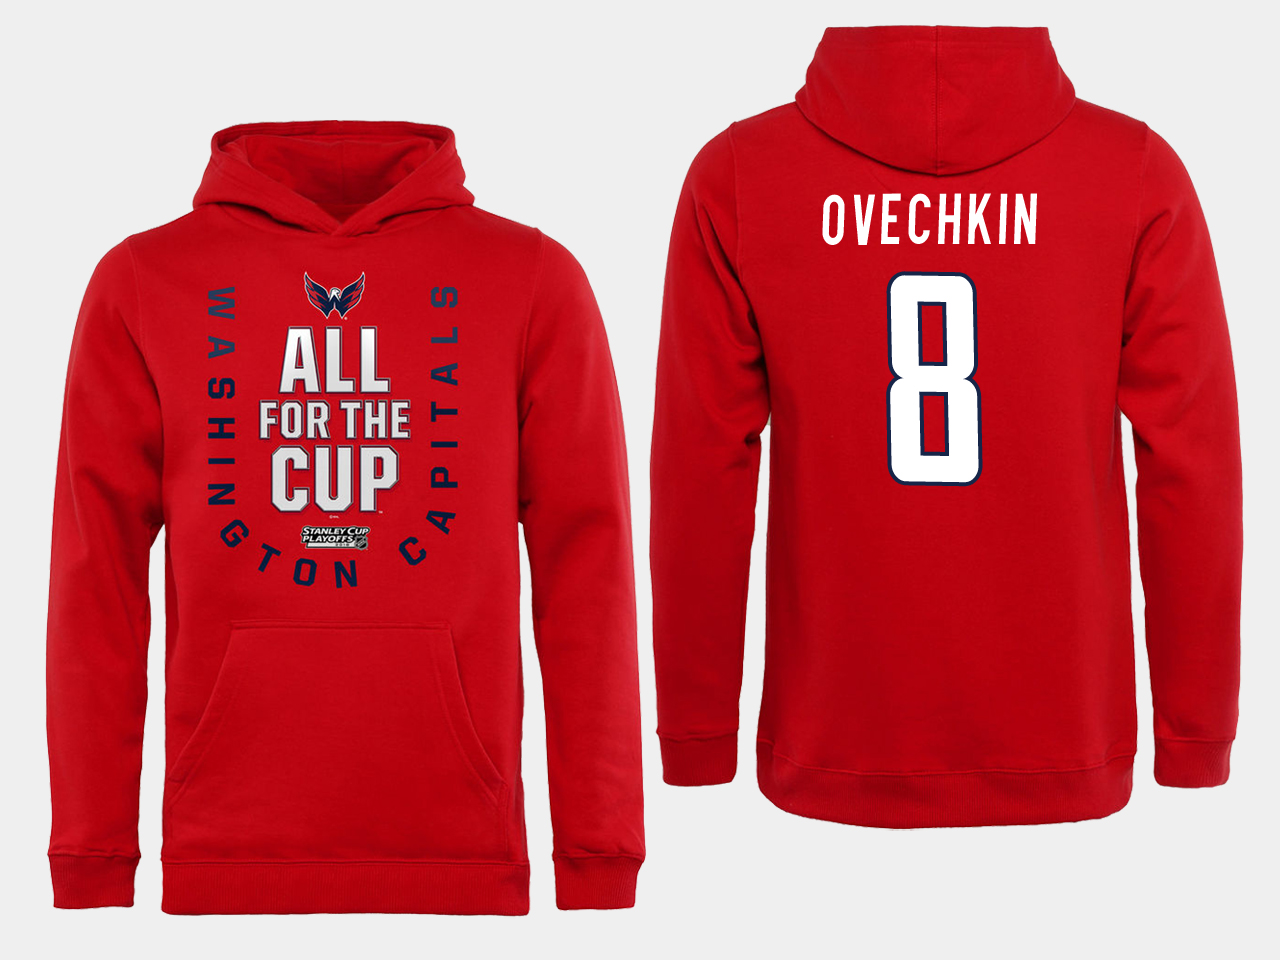 Men NHL Washington Capitals #8 Ovechkin Red All for the Cup Hoodie->washington capitals->NHL Jersey